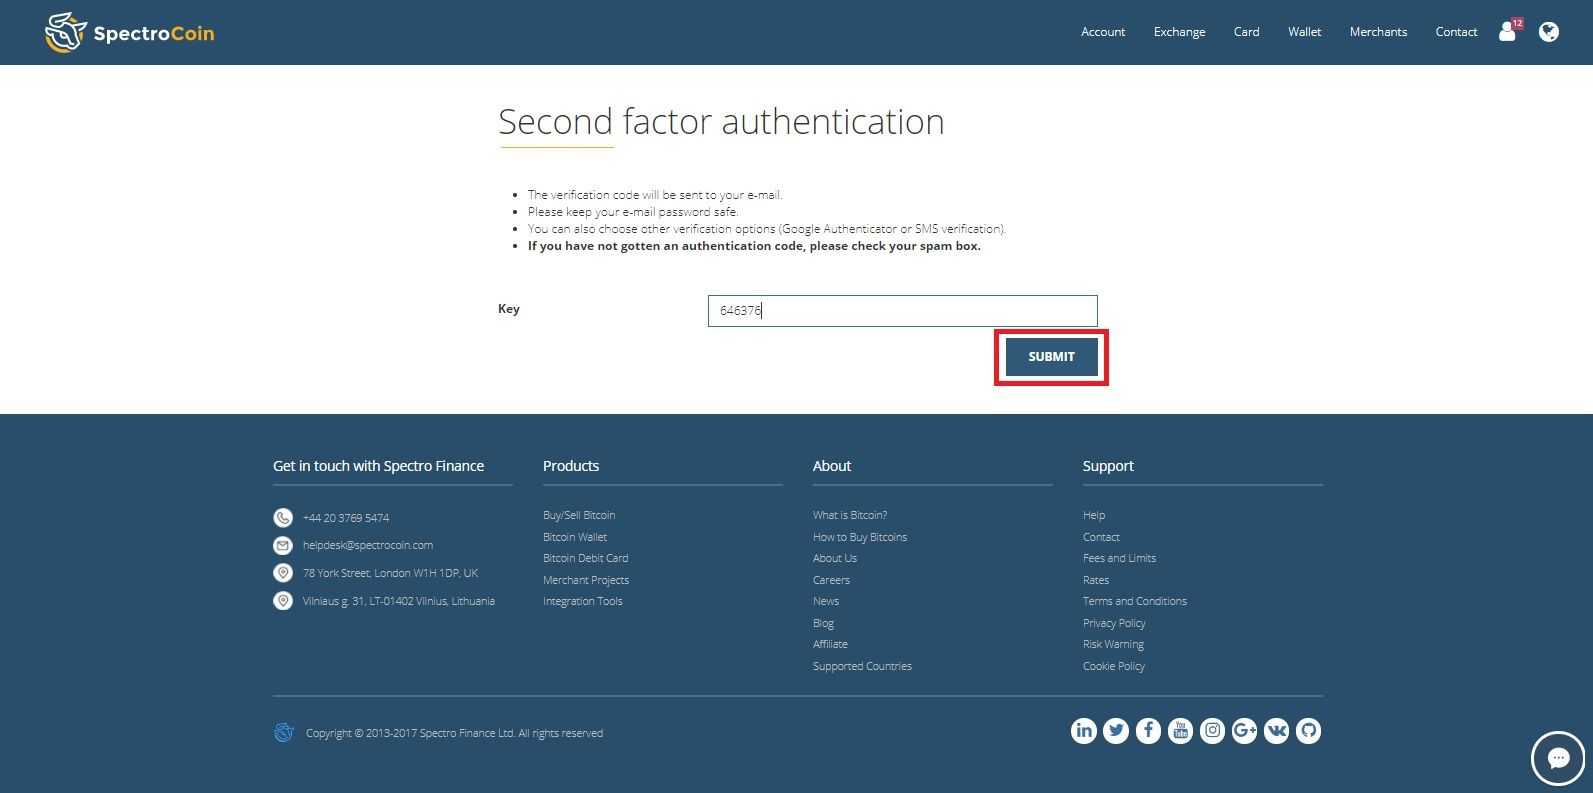 SpectroCoin "insert your second-factor authentication" key page